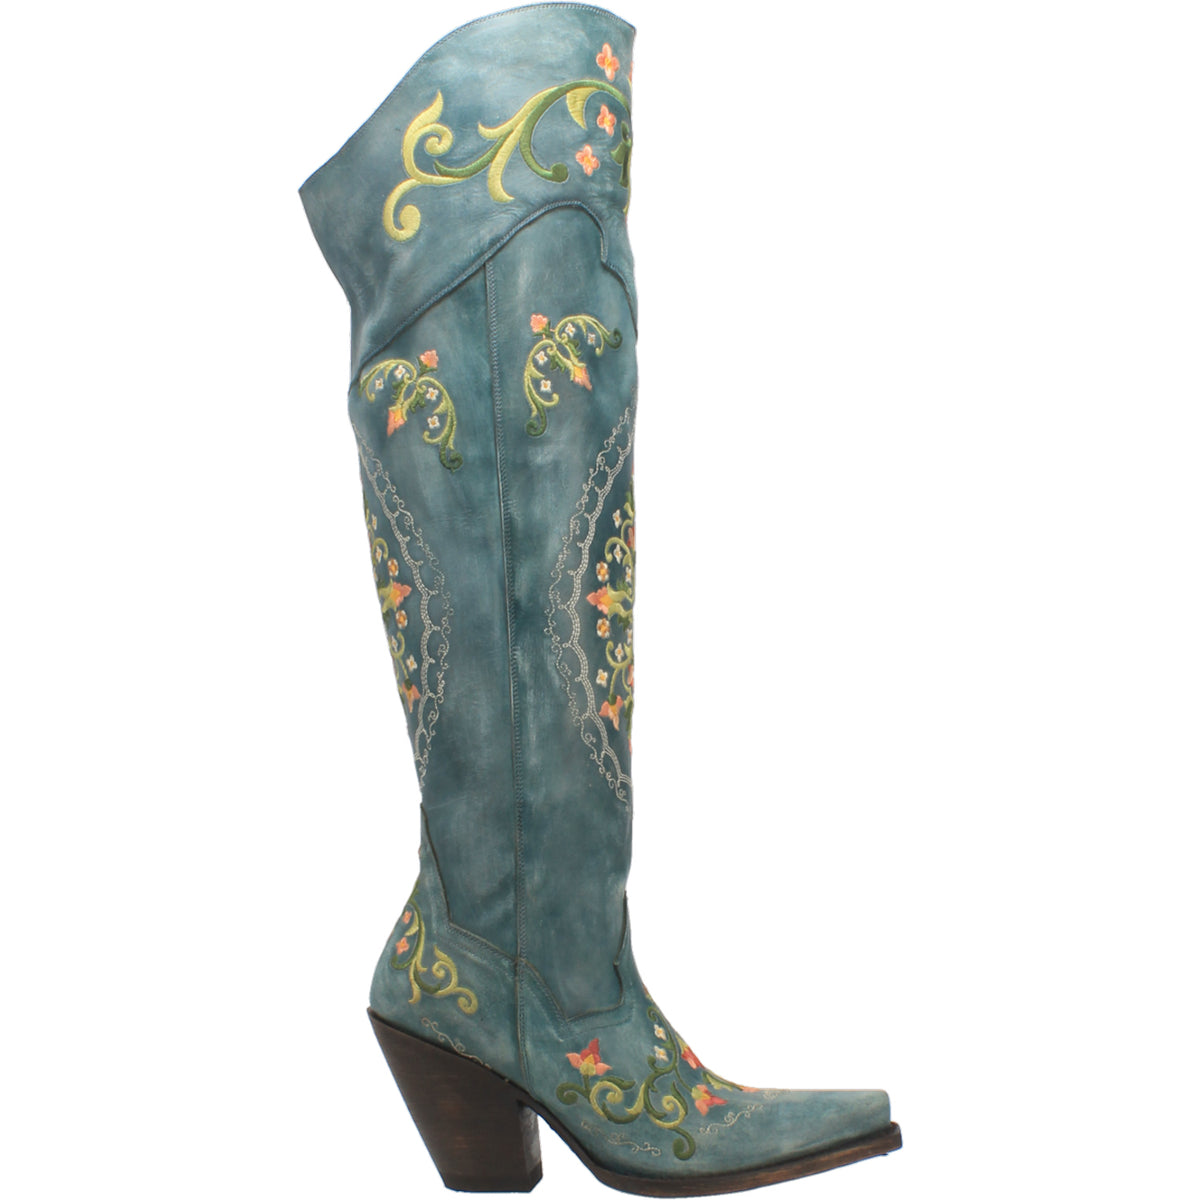 FLOWER CHILD LEATHER BOOT Cover